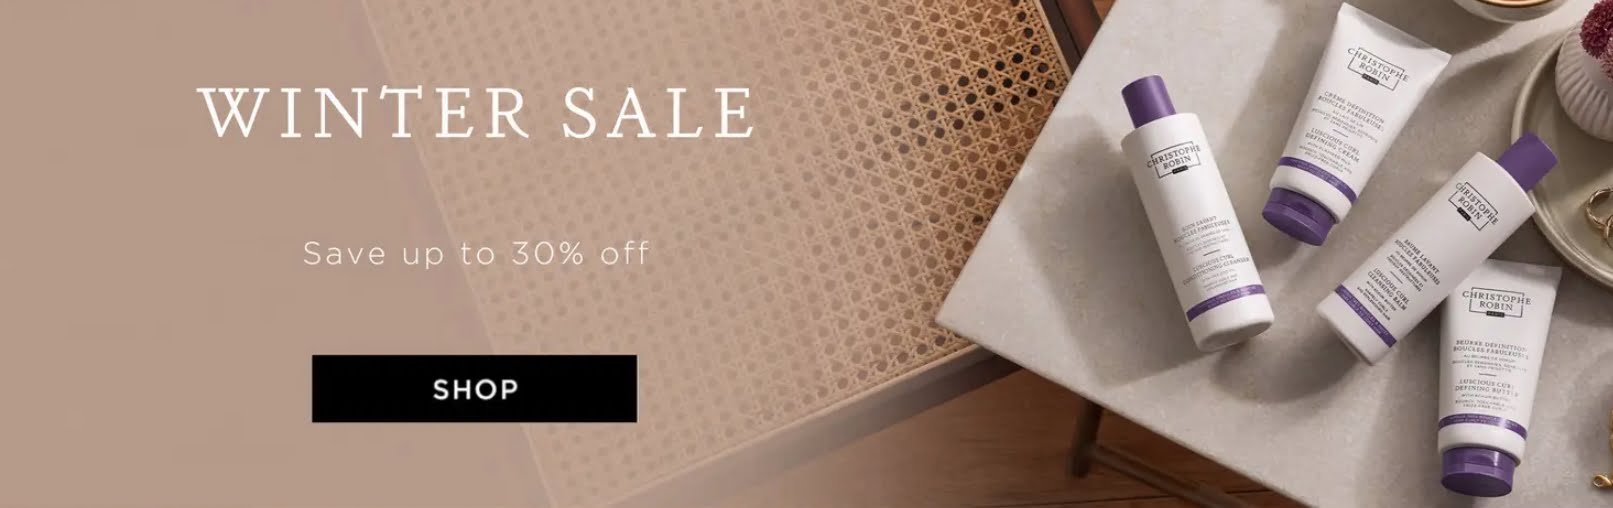 Winter Sale at Christophe Robin: Up to 30% off selected